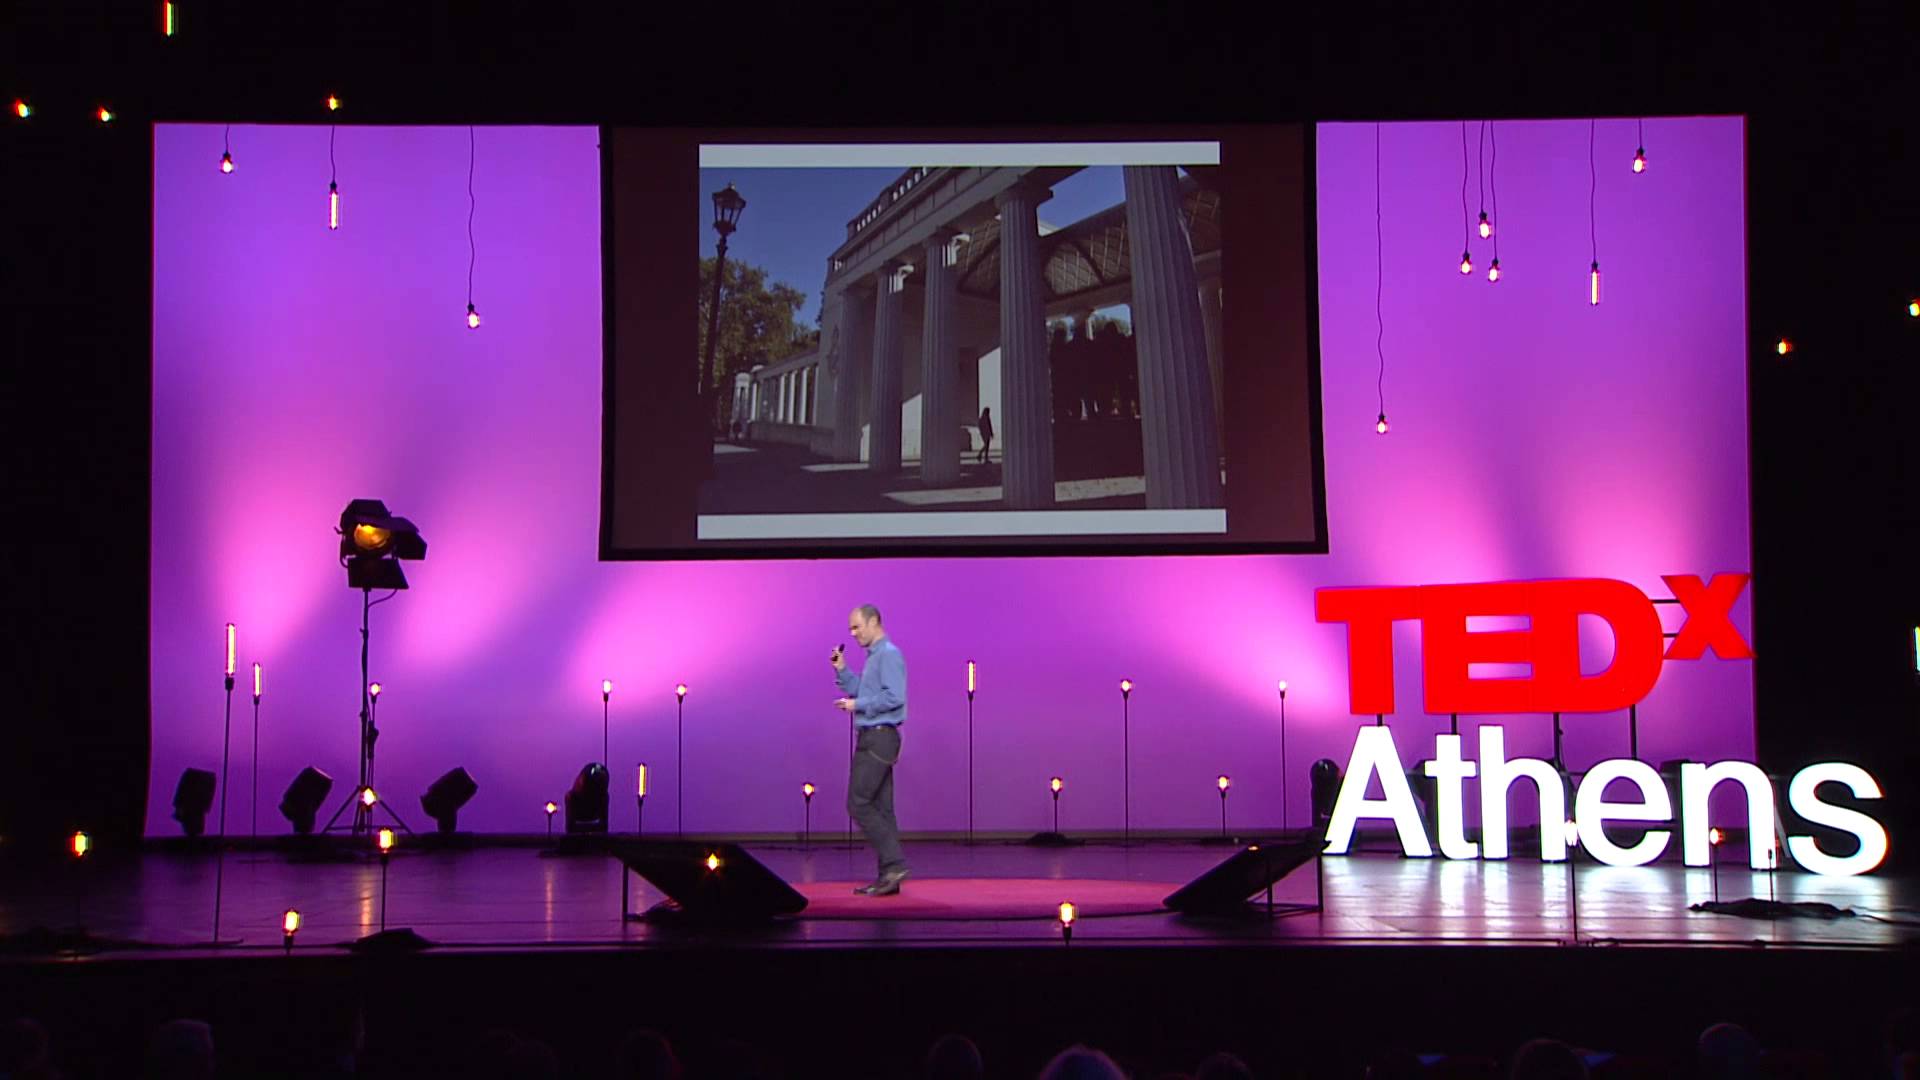 Why are we so obsessed with World War II? | Keith Lowe | TEDxAthens